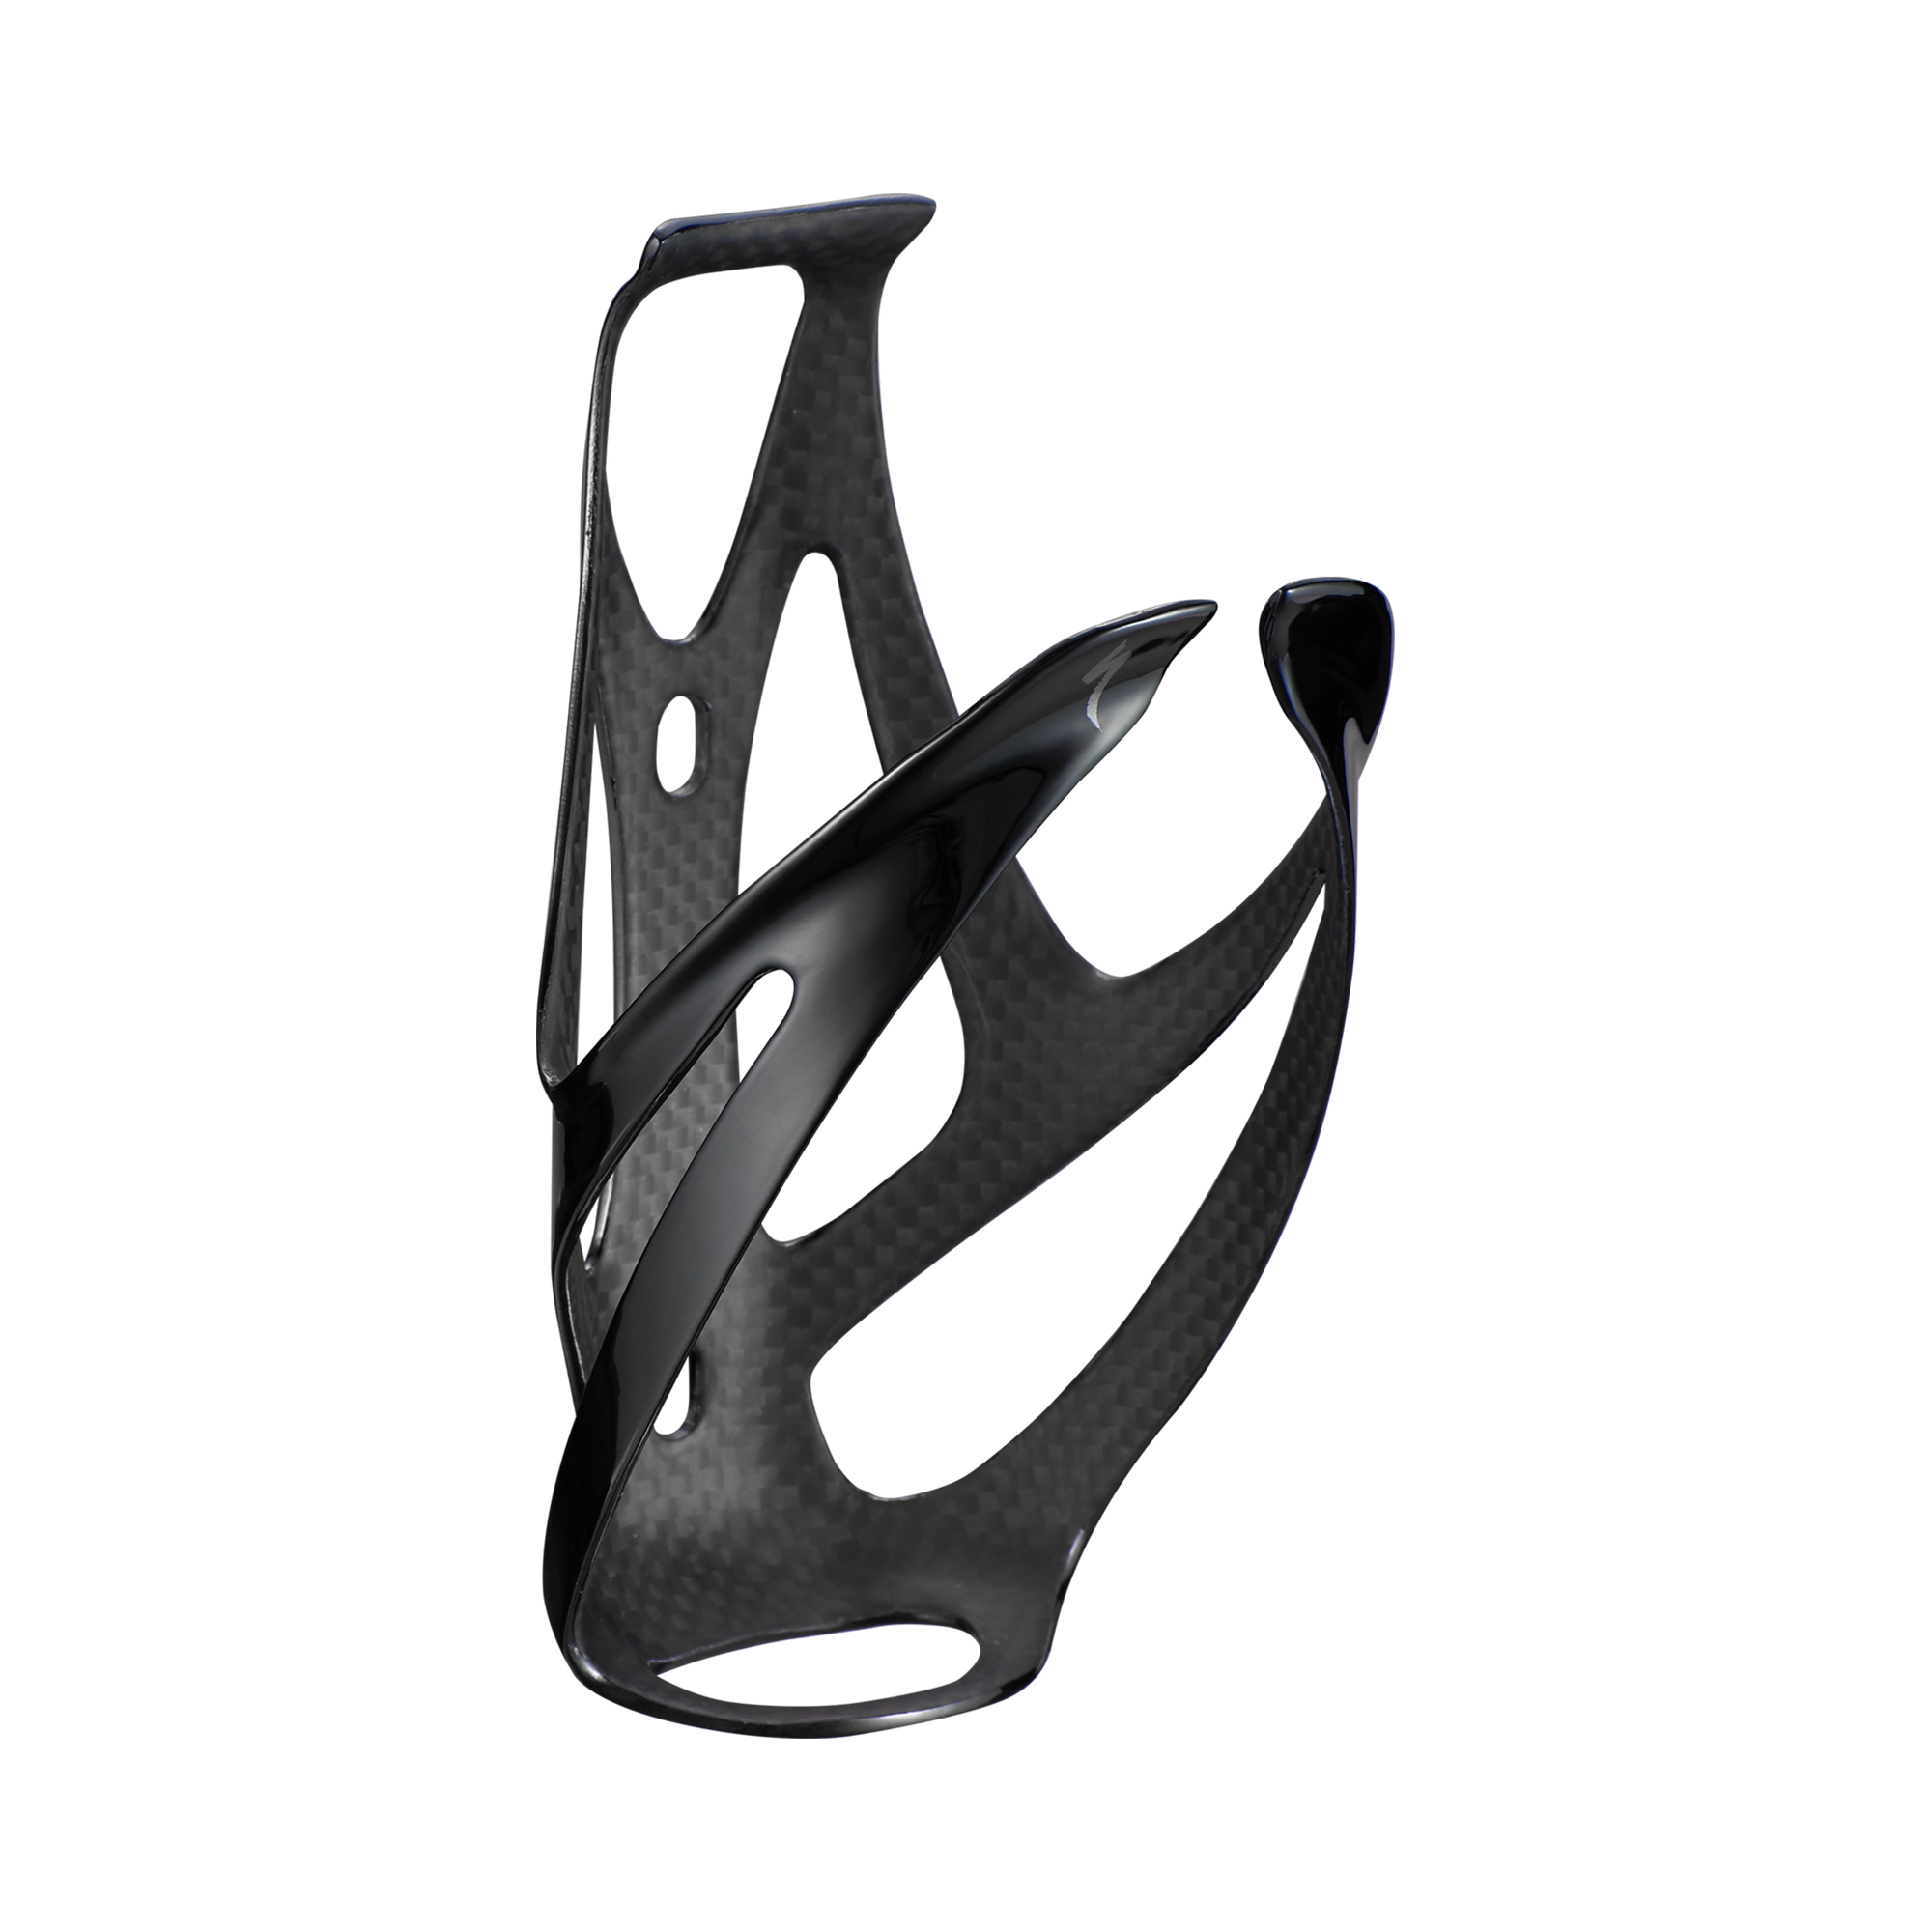 Porte-Bouteille S-Works Carbon Rib Cage II